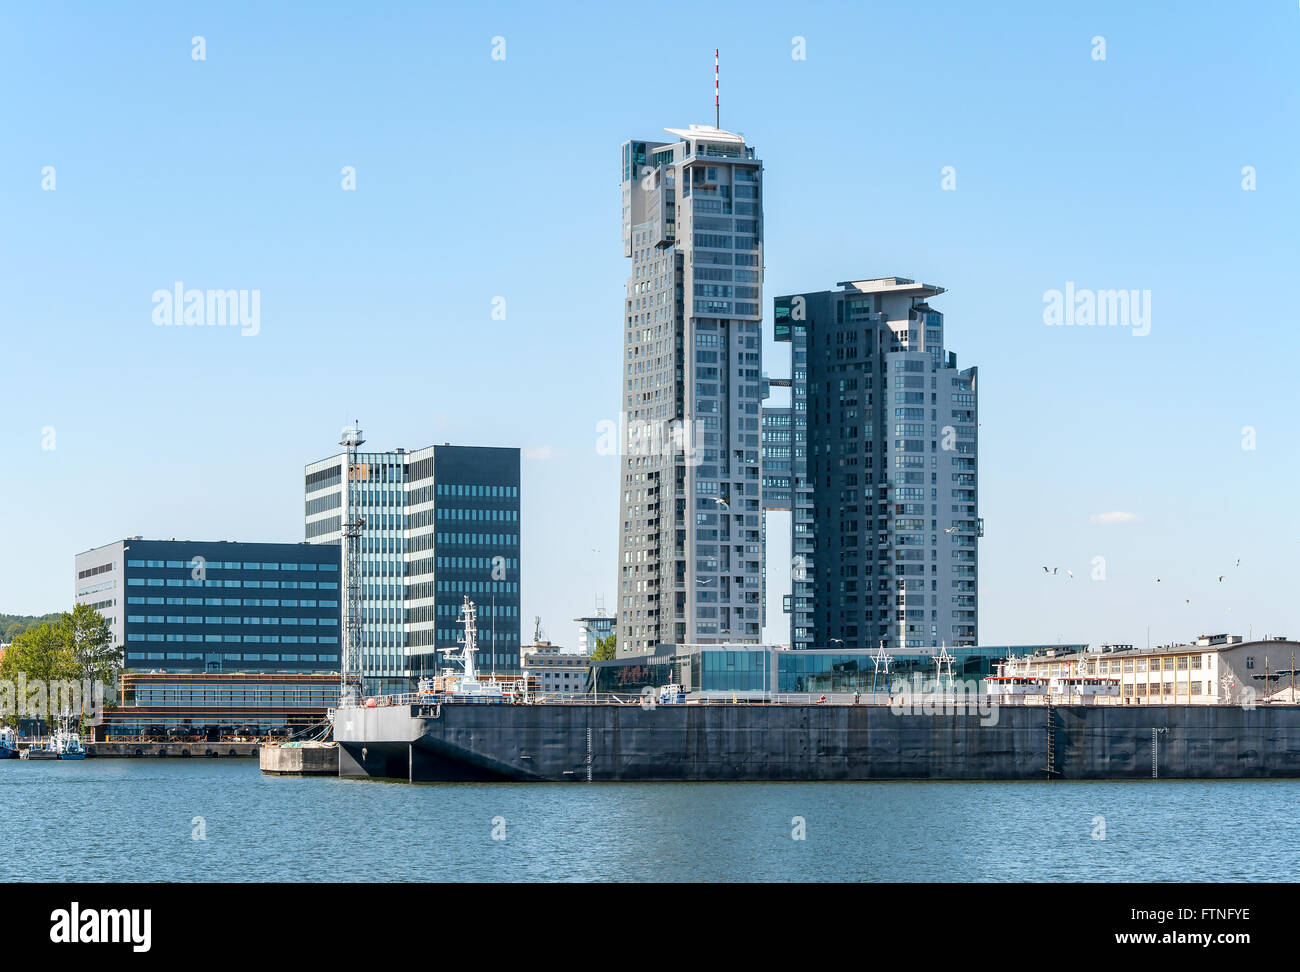 Gdynia, Poland, cityscape with the port wharf and modern buildings Stock Photo